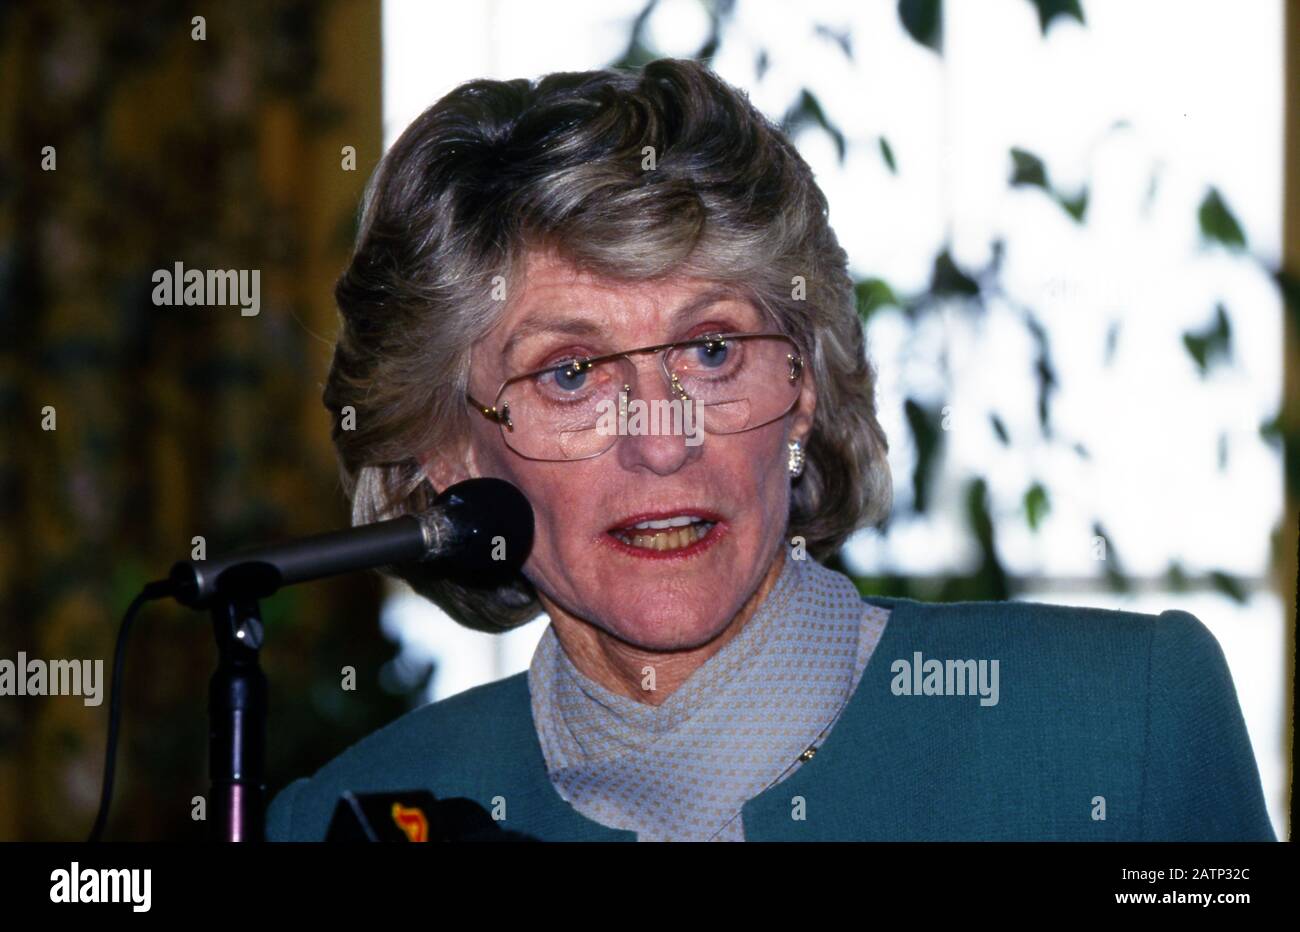 Jean Ann Kennedy Smith (born February 20, 1928) is an American diplomat,  activist, humanitarian and author who served as United States Ambassador to  Ireland from 1993 to 1998. She is a member